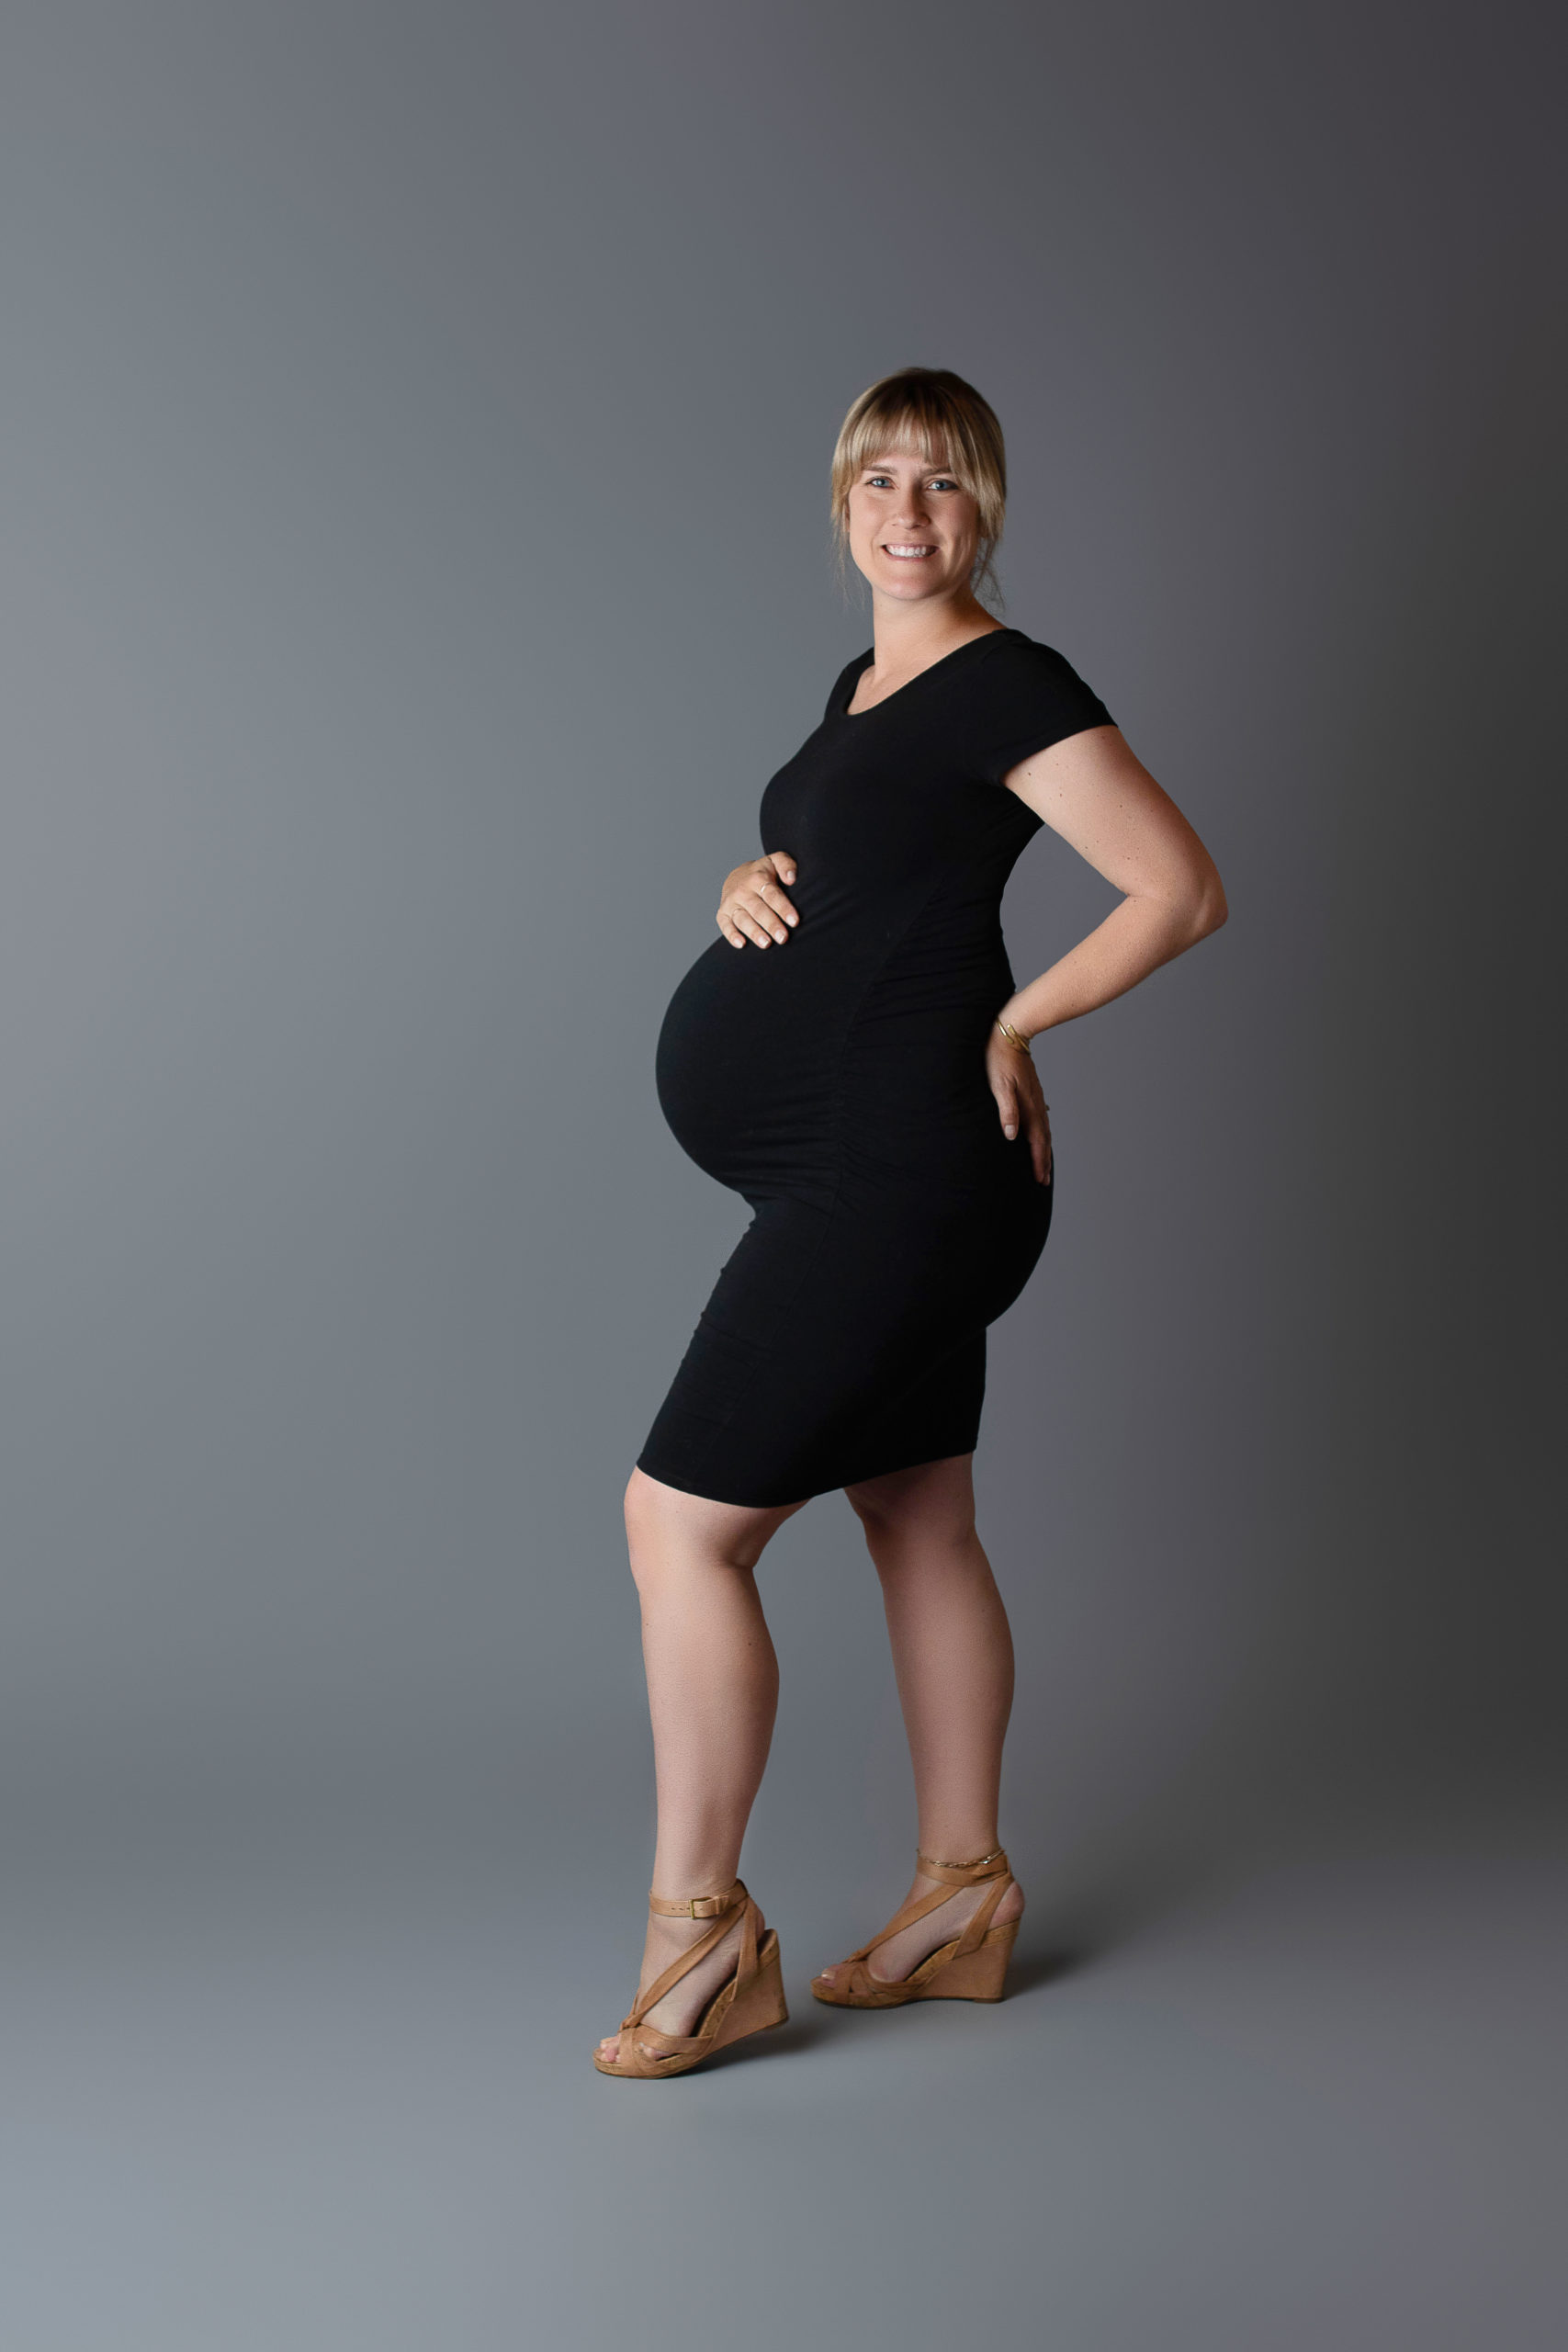 expectant mother wearing a black dress while getting maternity pictures in Milwaukee studio